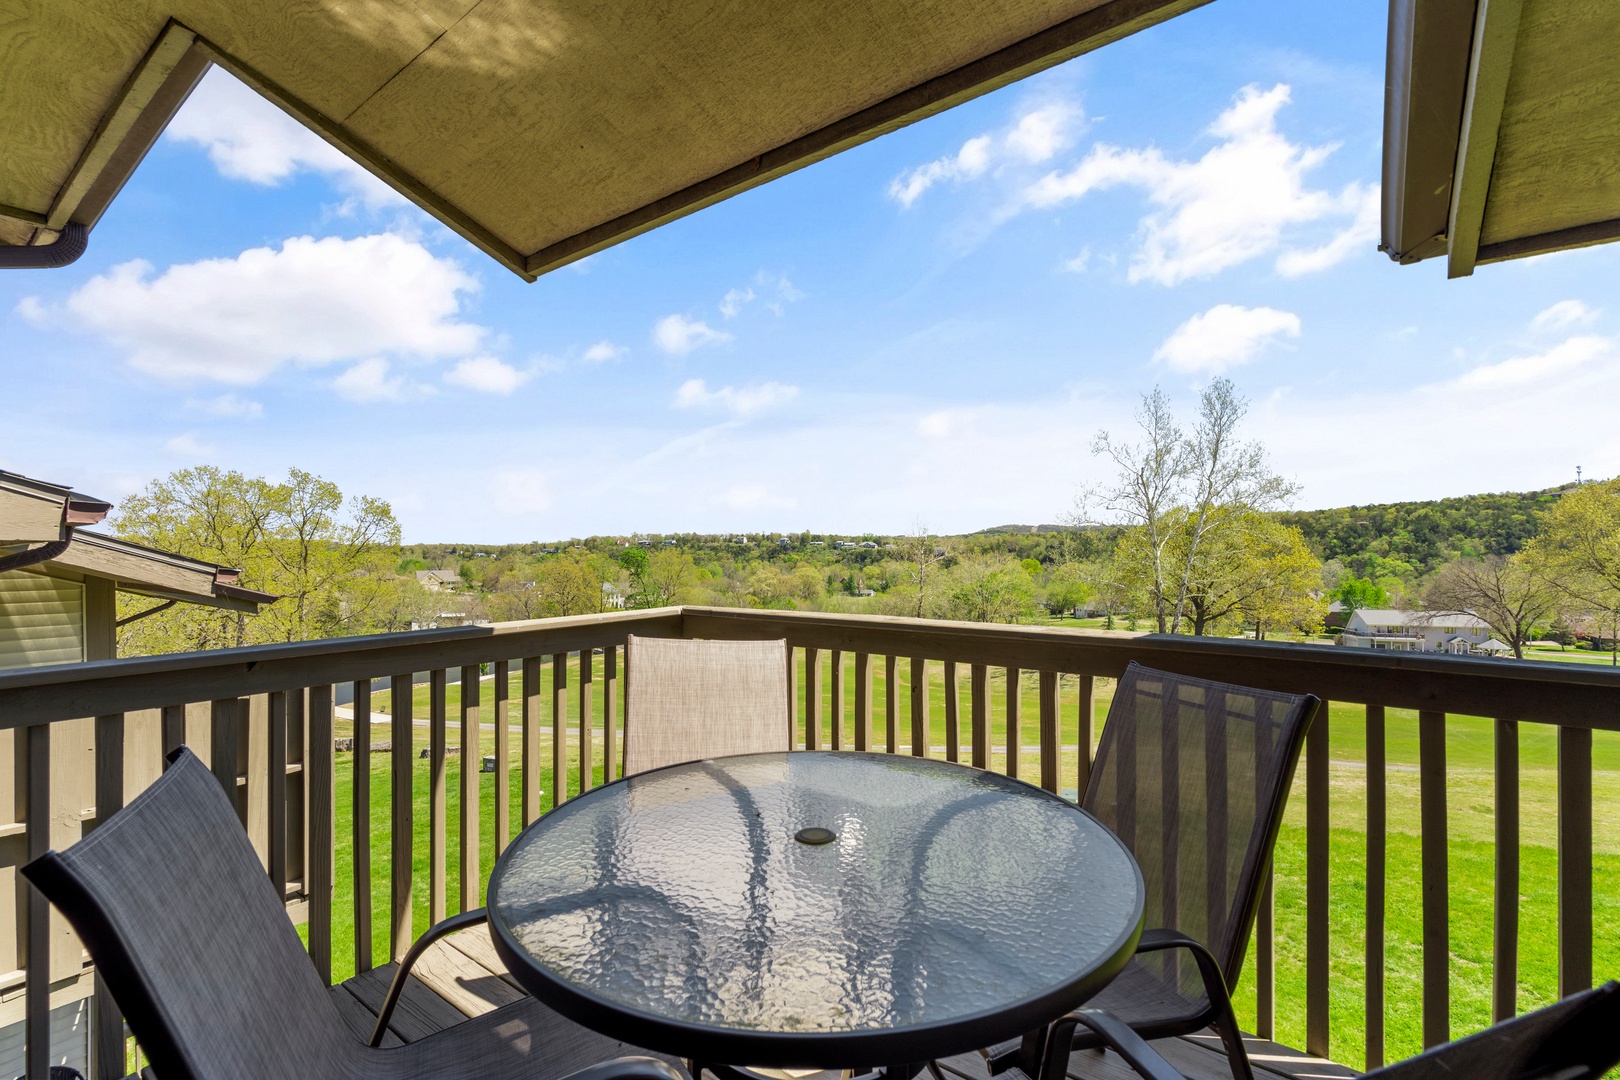 Lounge the day away or dine alfresco on the balcony with golf course views